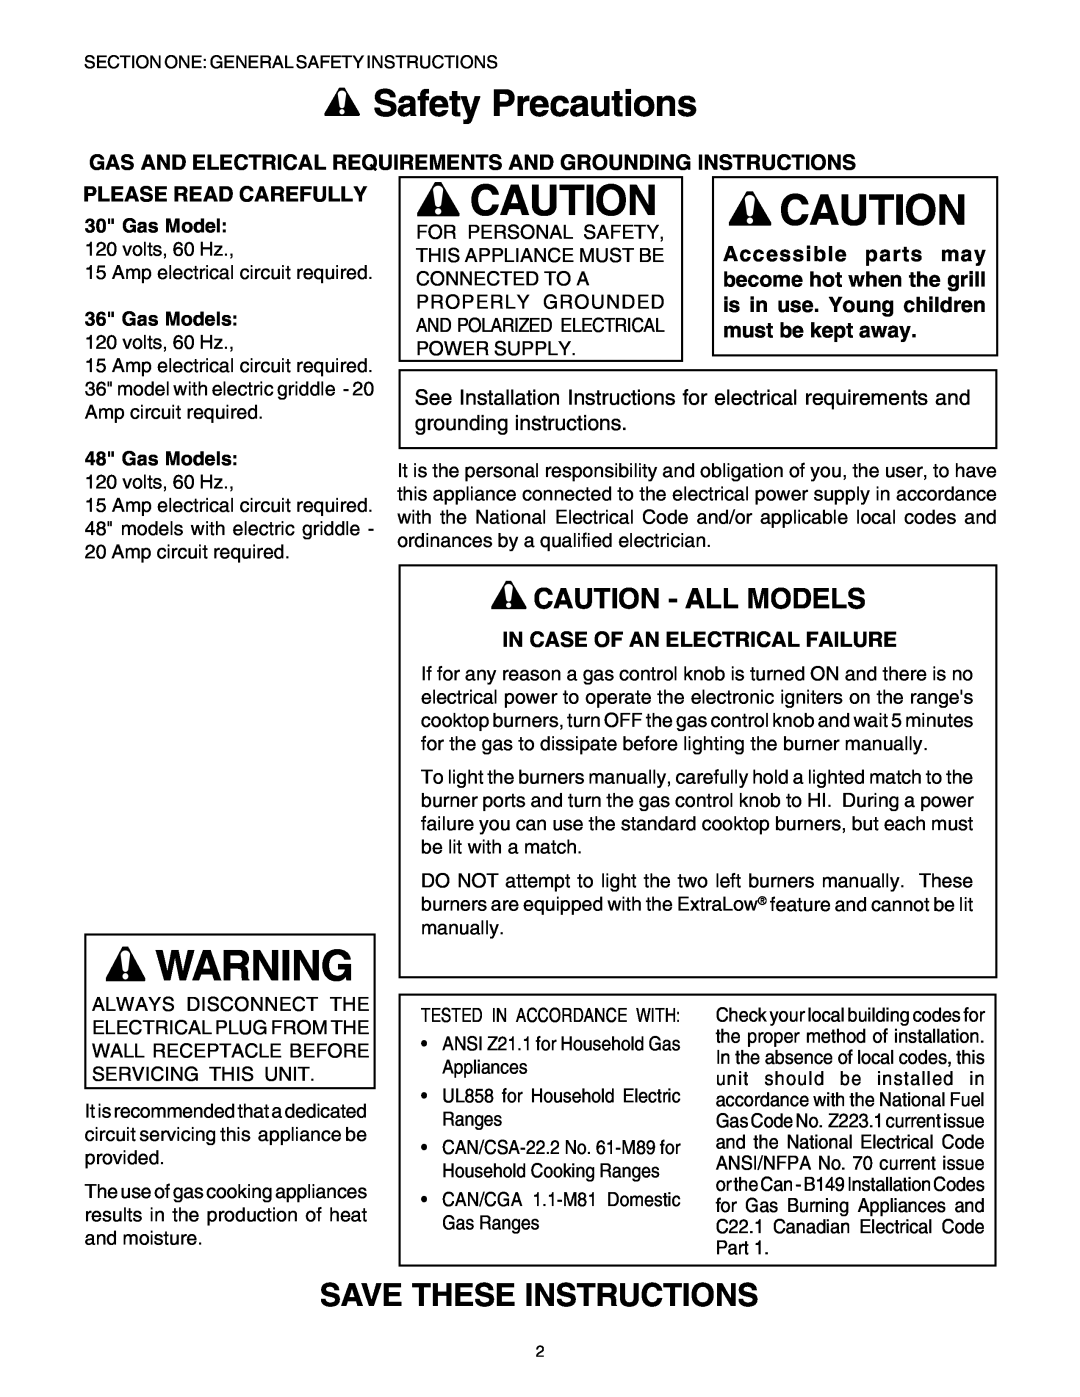 Thermador PRG30, PRG36 Safety Precautions, Save These Instructions, Caution - All Models, Please Read Carefully, Gas Model 